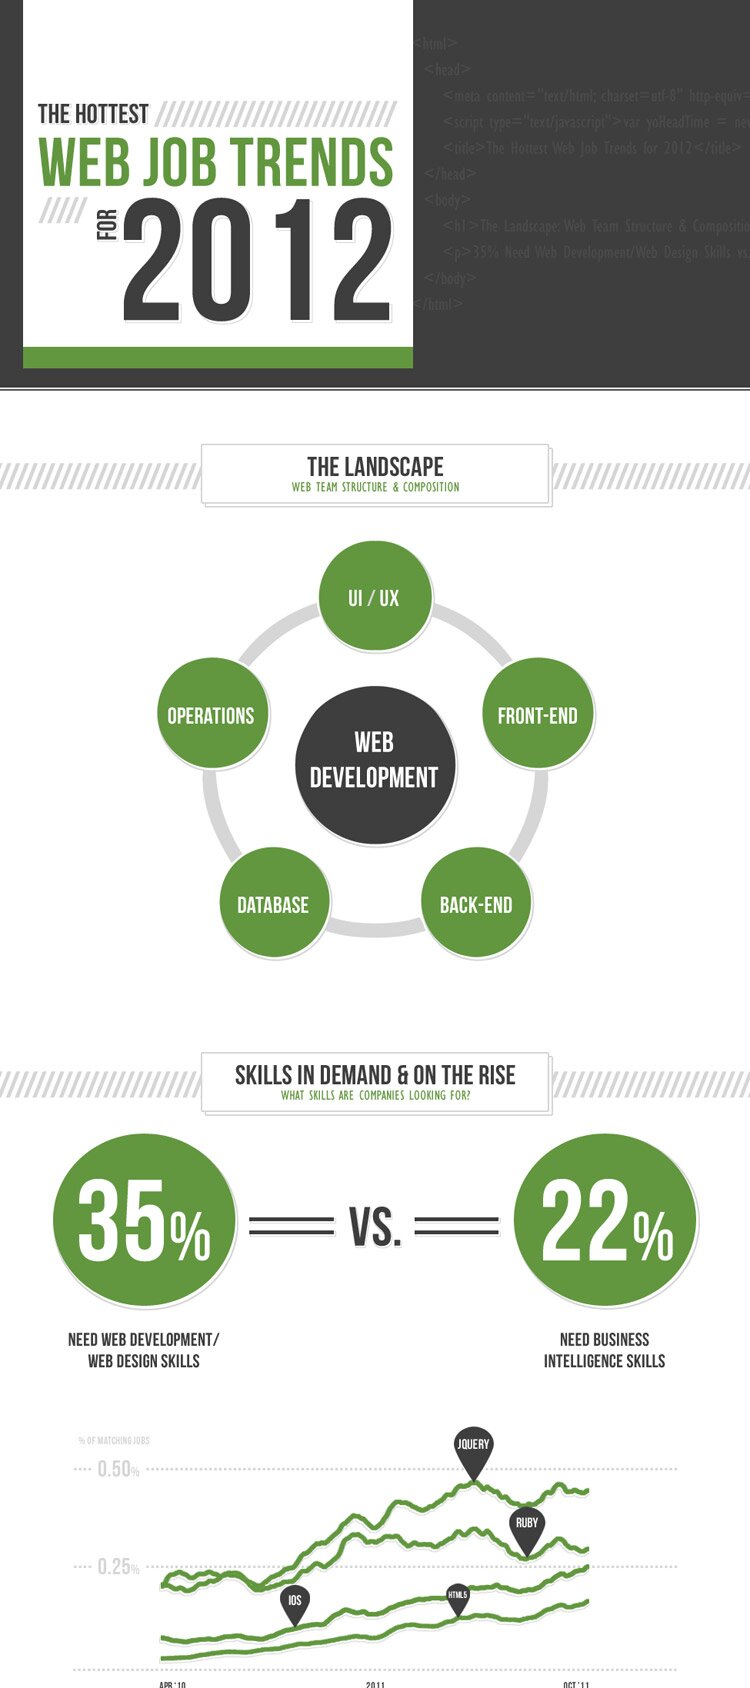 The bigger version of The Hottest Web Job Trends for 2012